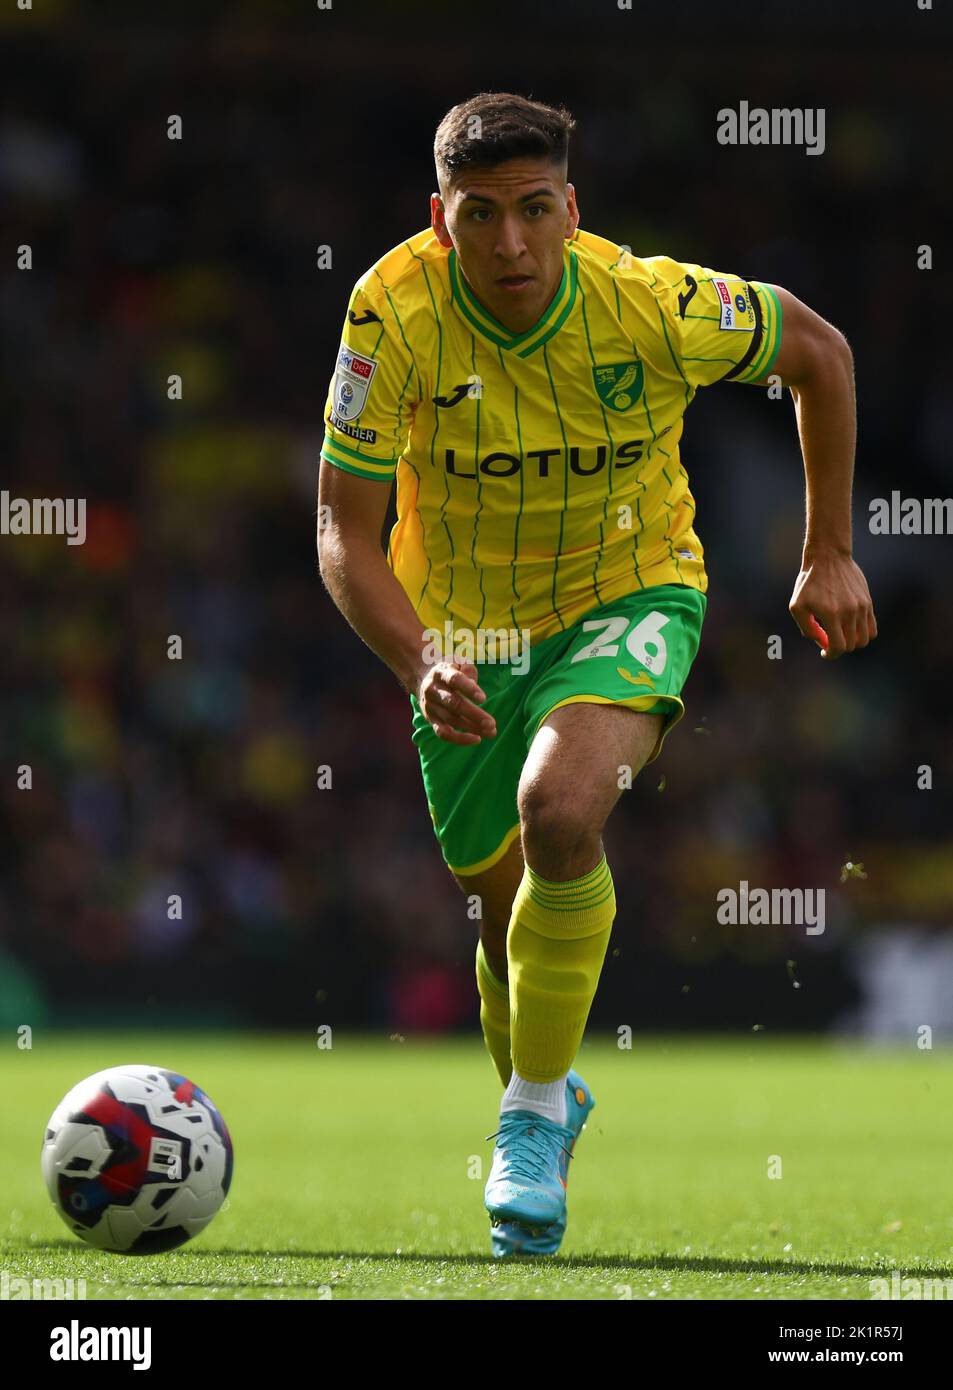 Marcelino Nunez of Norwich City - Norwich City v West Bromwich Albion, Sky Bet Championship, Carrow Road, Norwich, UK - 17th September 2022  Editorial Use Only - DataCo restrictions apply Stock Photo